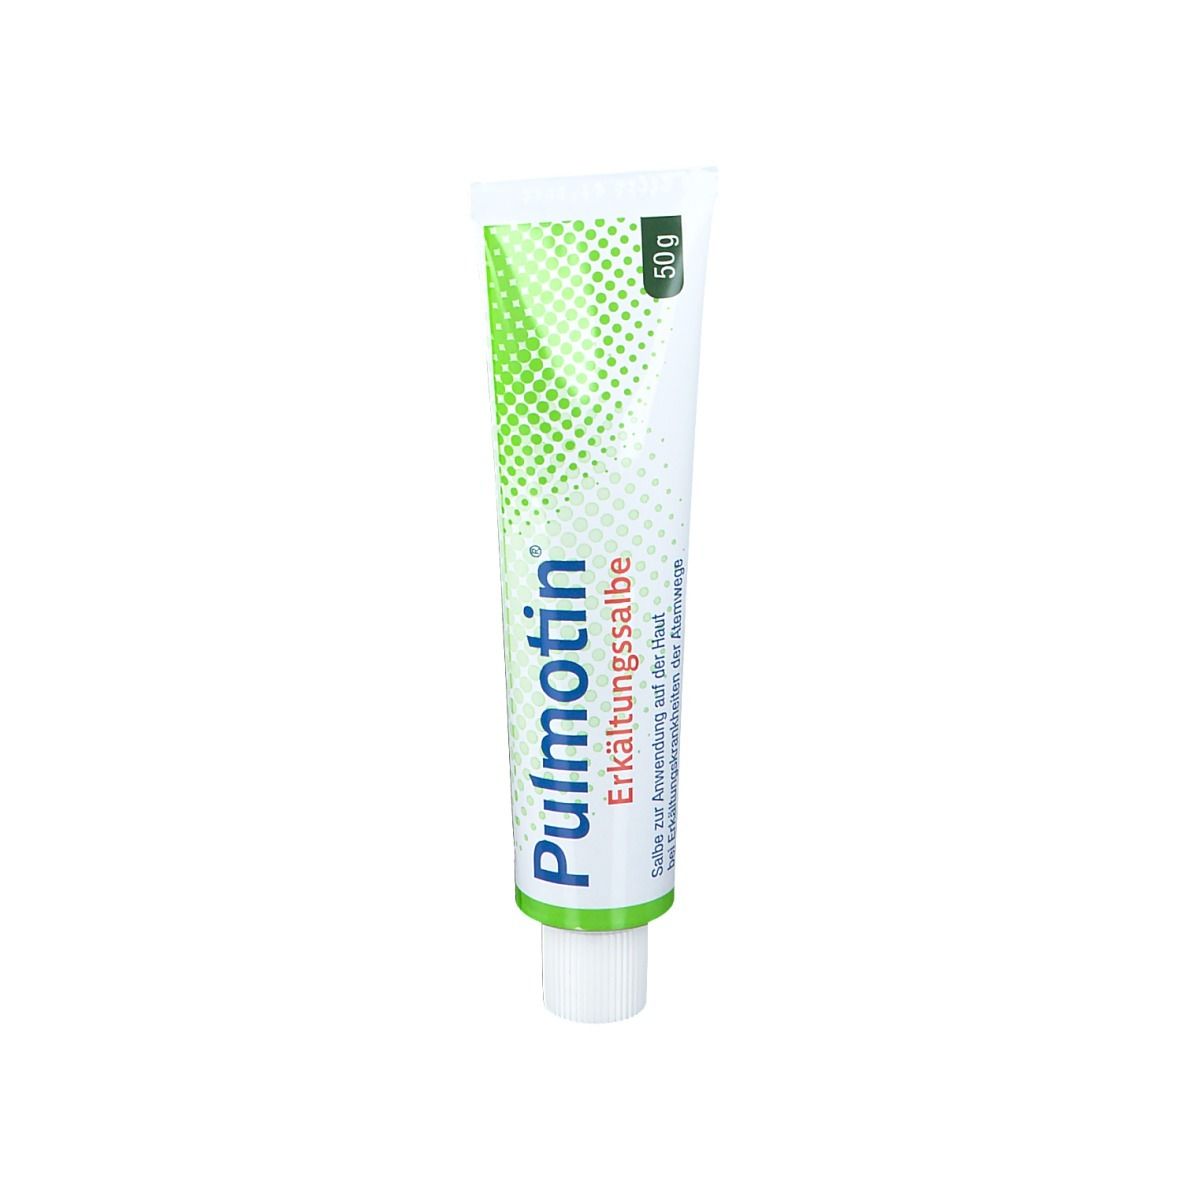 Pulmotin® cold ointment